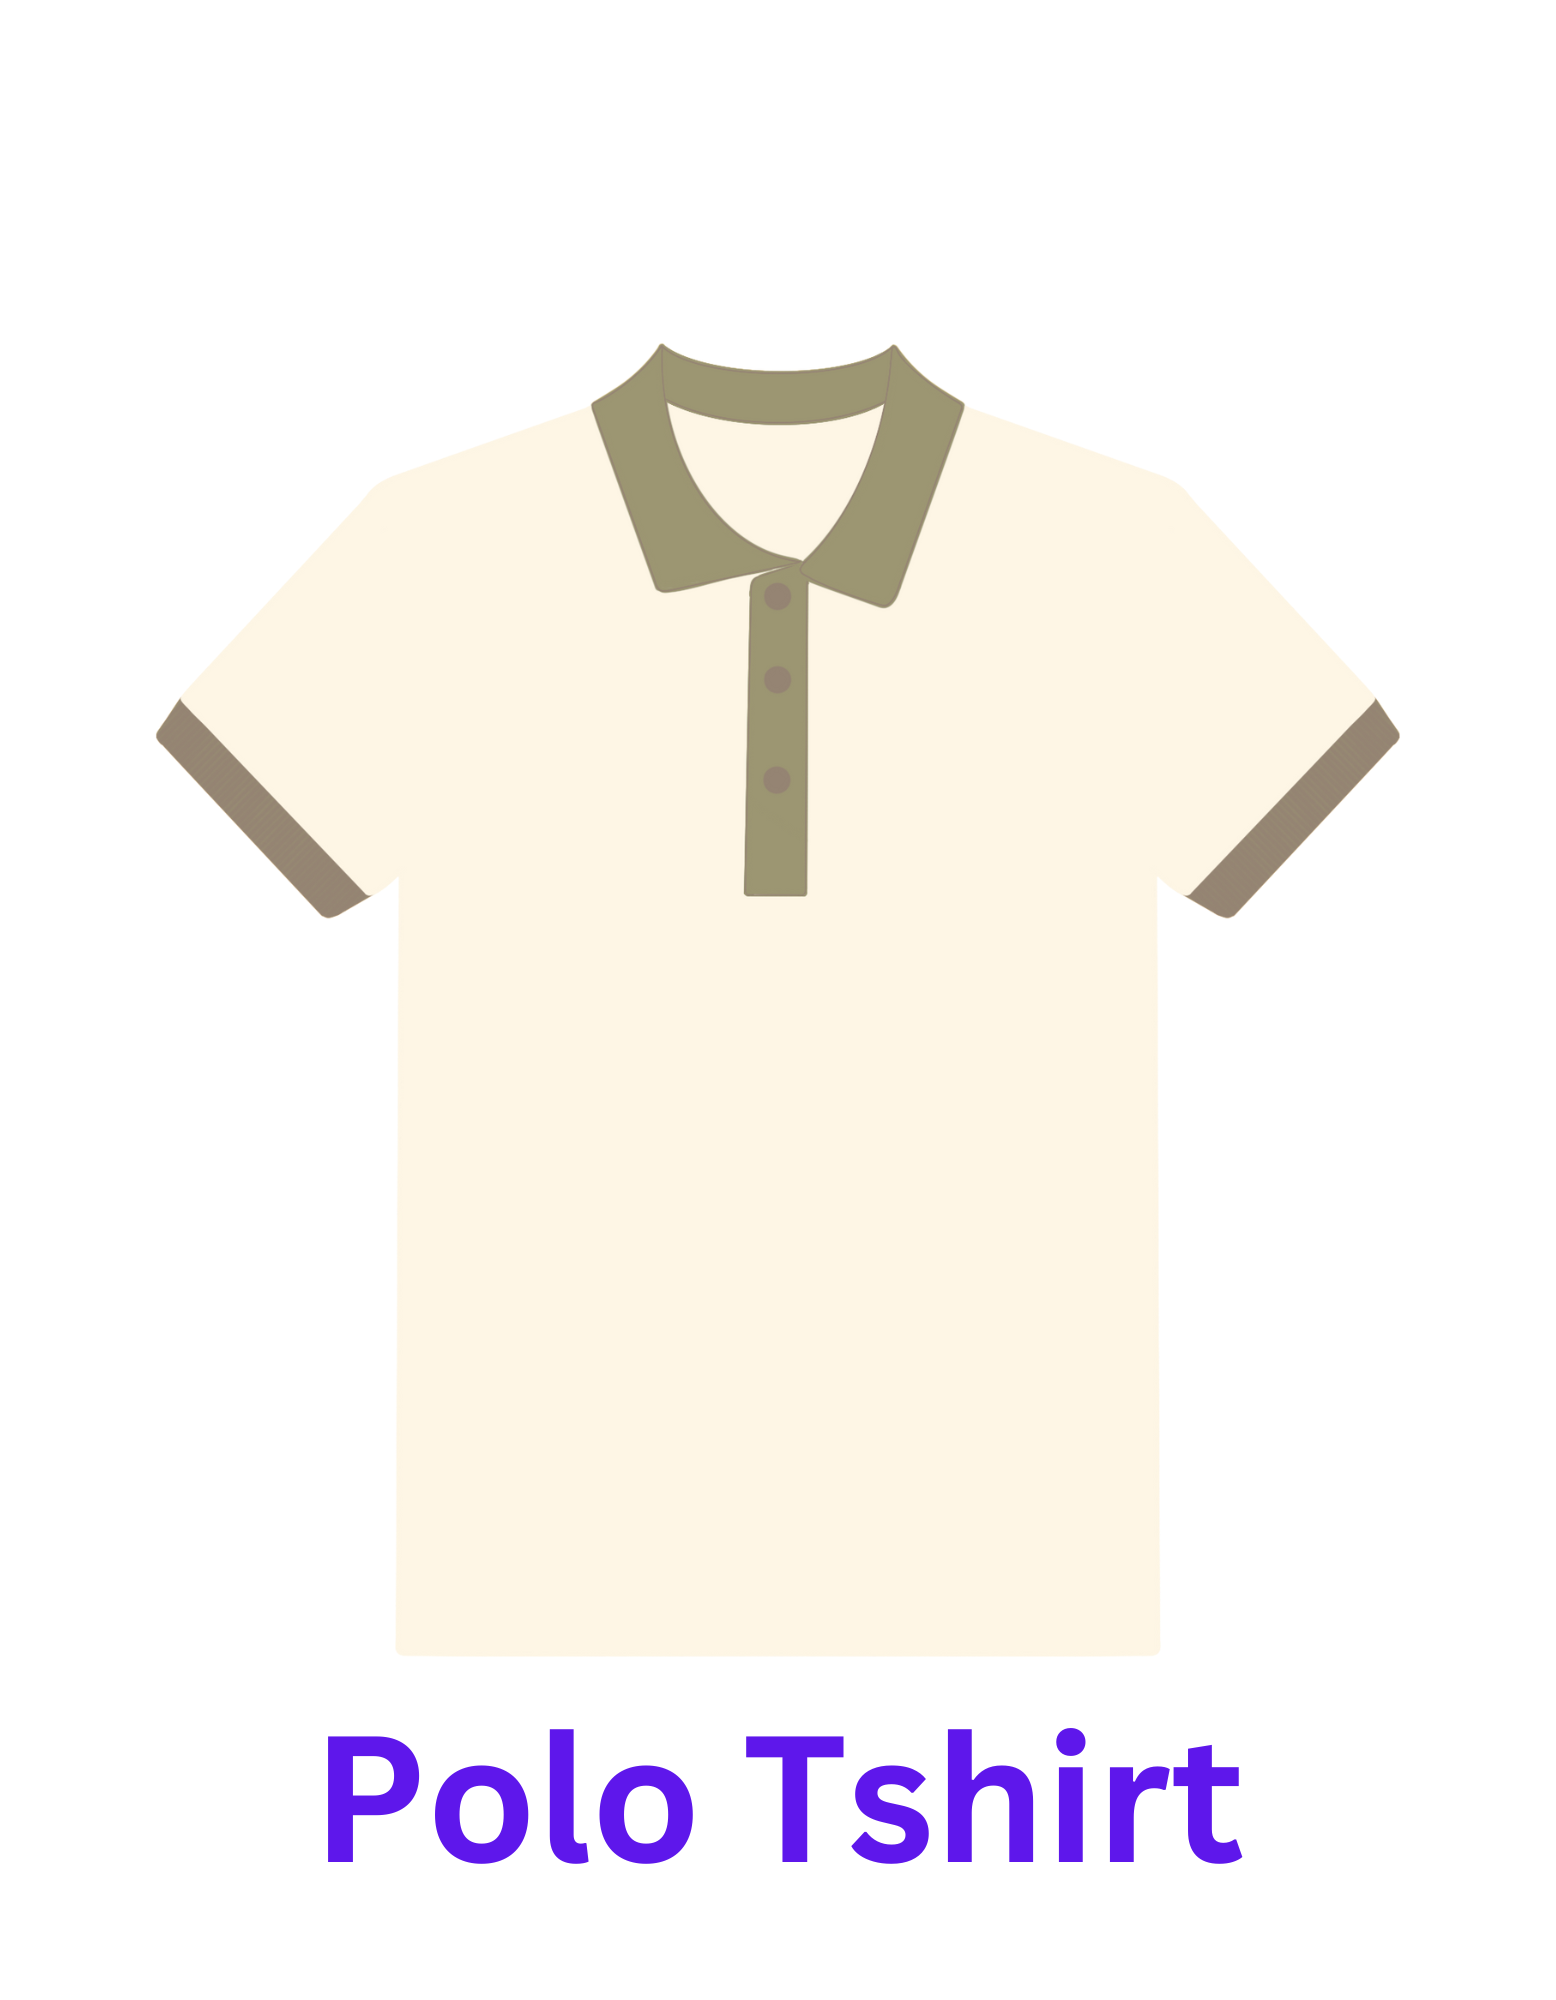 A white polo tshirt with a collared neckline, three-button placket, and short sleeves. The shirt is made of knitted cotton fabric and has a relaxed fit. It is styled with a small logo embroidered on the chest."